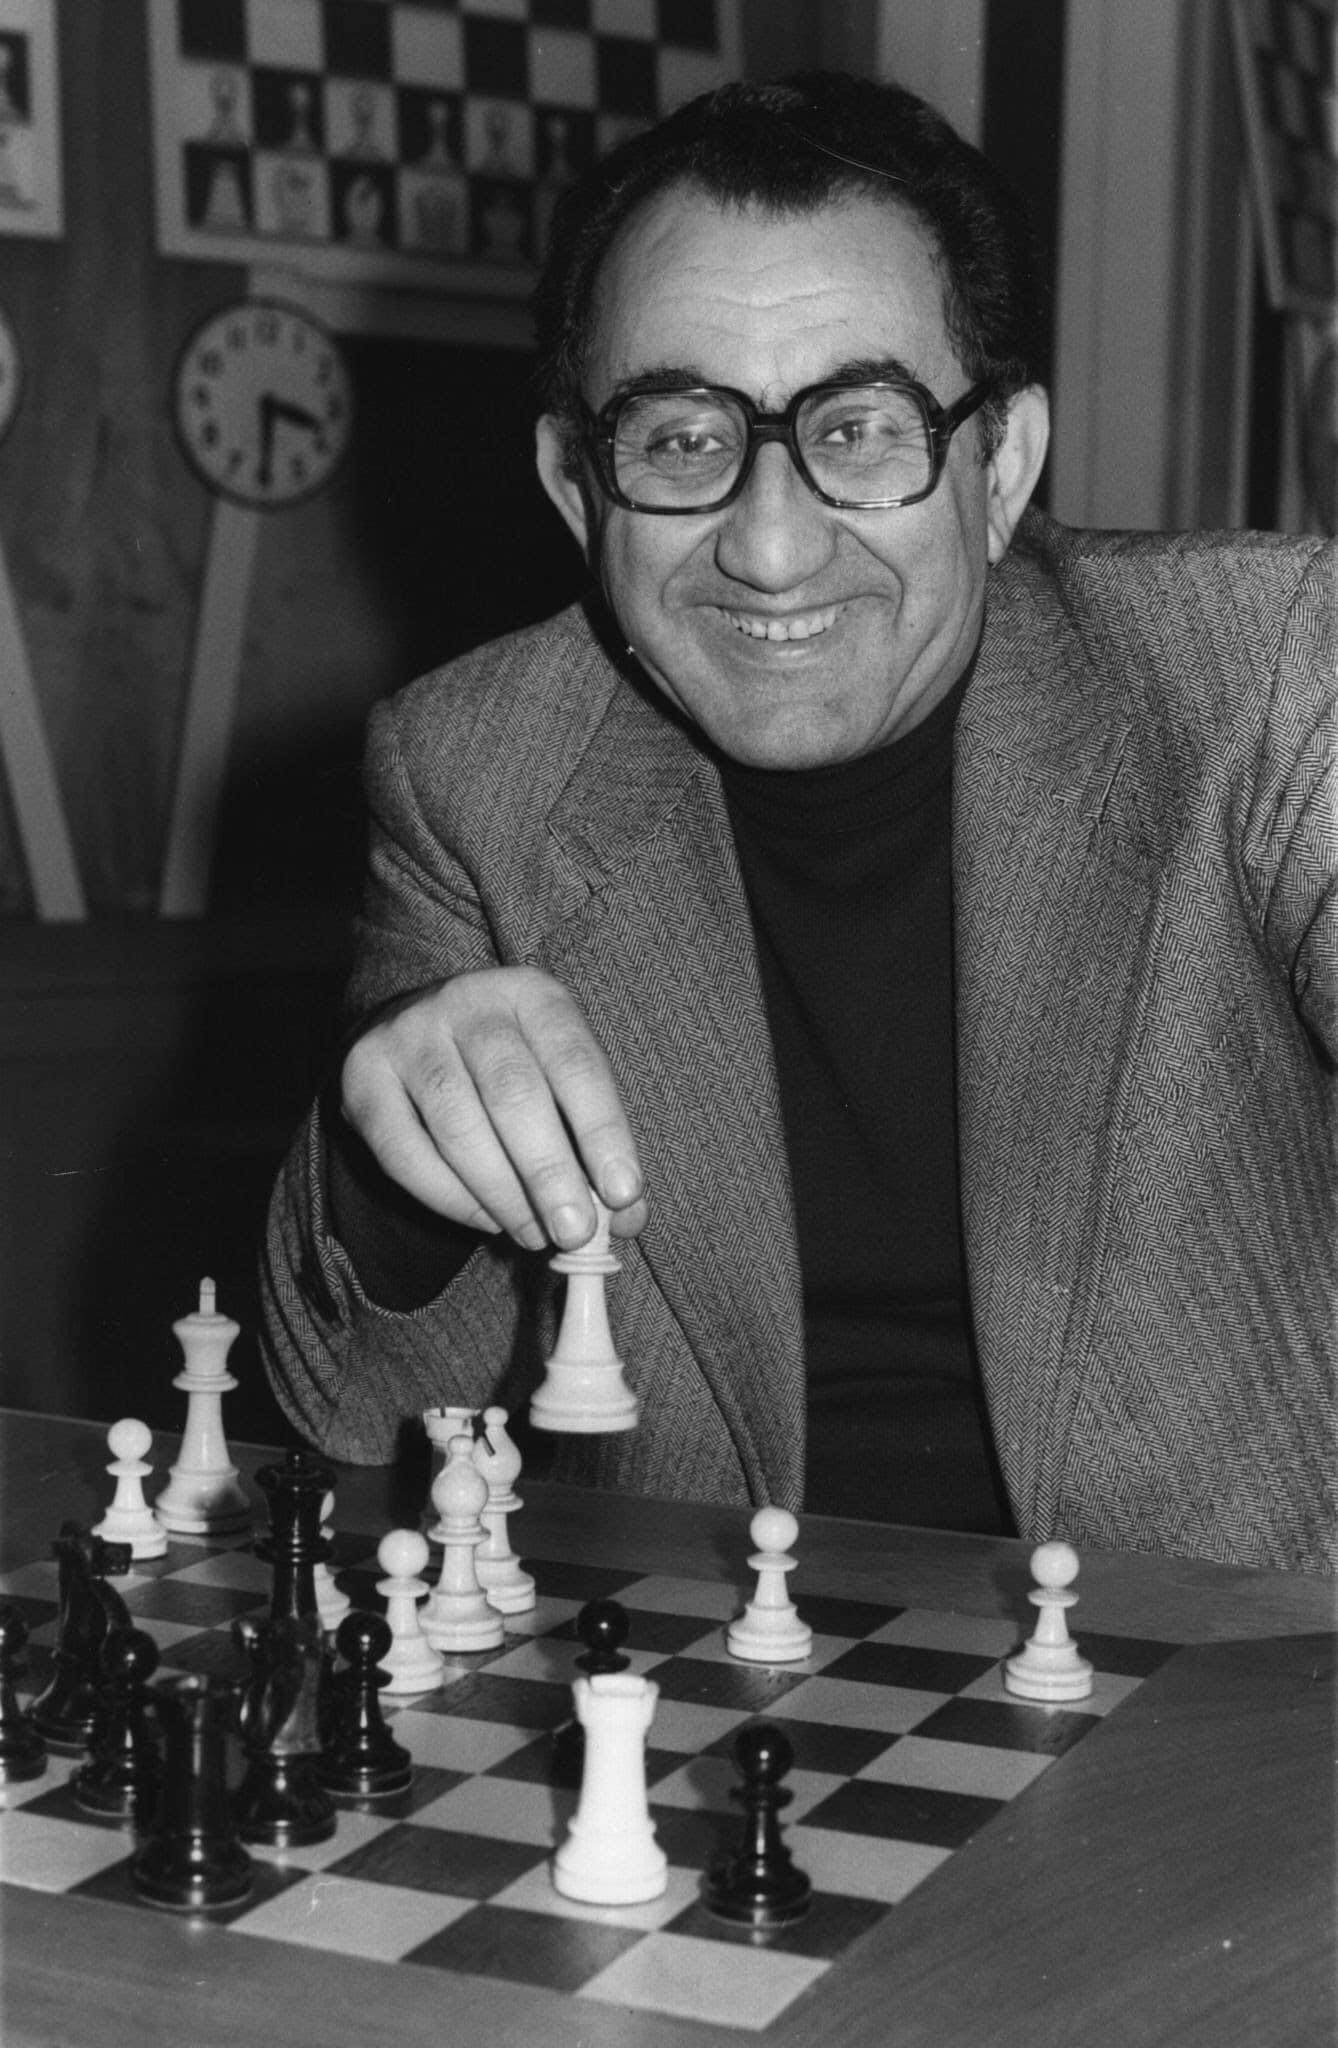 Tigran Petrosian Chess Products  The Life, Chess Games and Products of  World Champion Tigran Petrosian